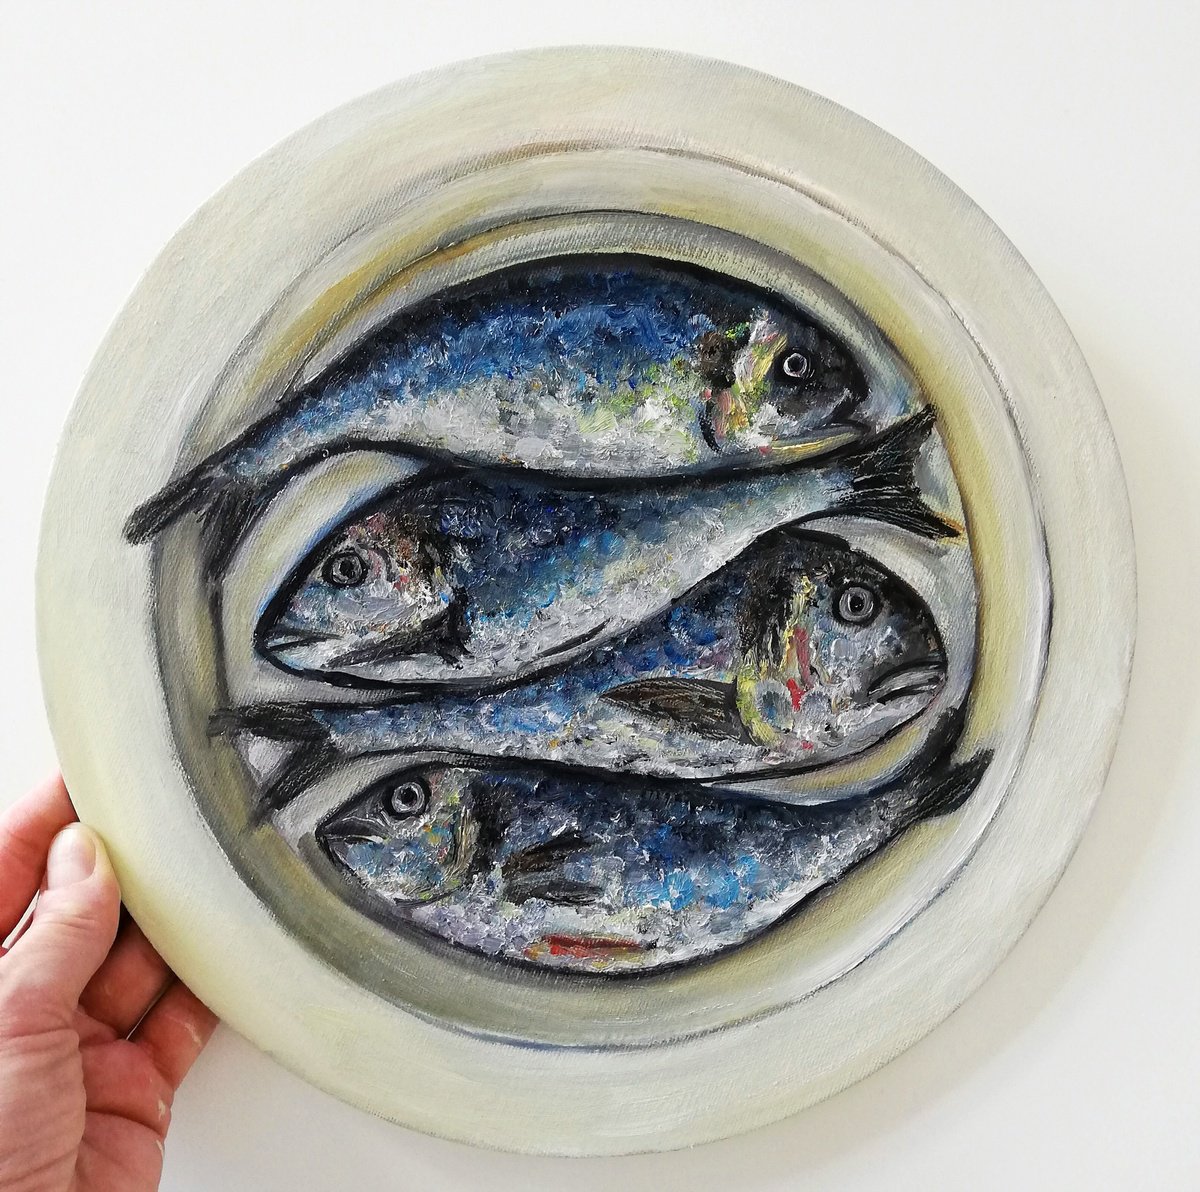 Four Fishes in a Plate Original Oil on Round Canvas Board Painting 12 by 12 inches (30x3... by Katia Ricci